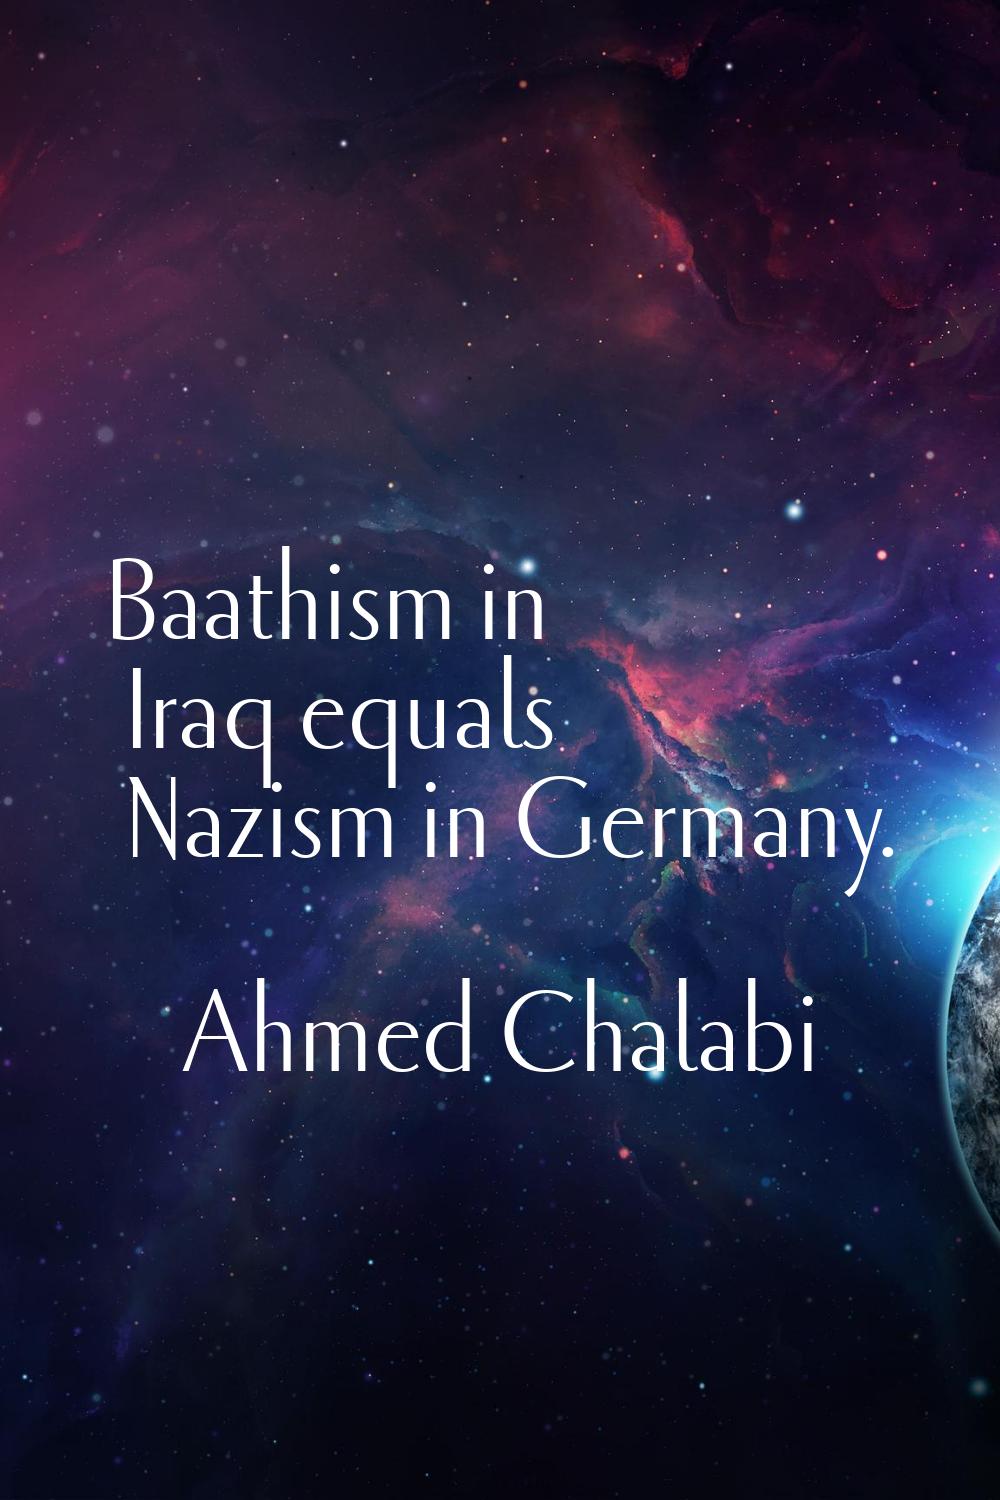 Baathism in Iraq equals Nazism in Germany.